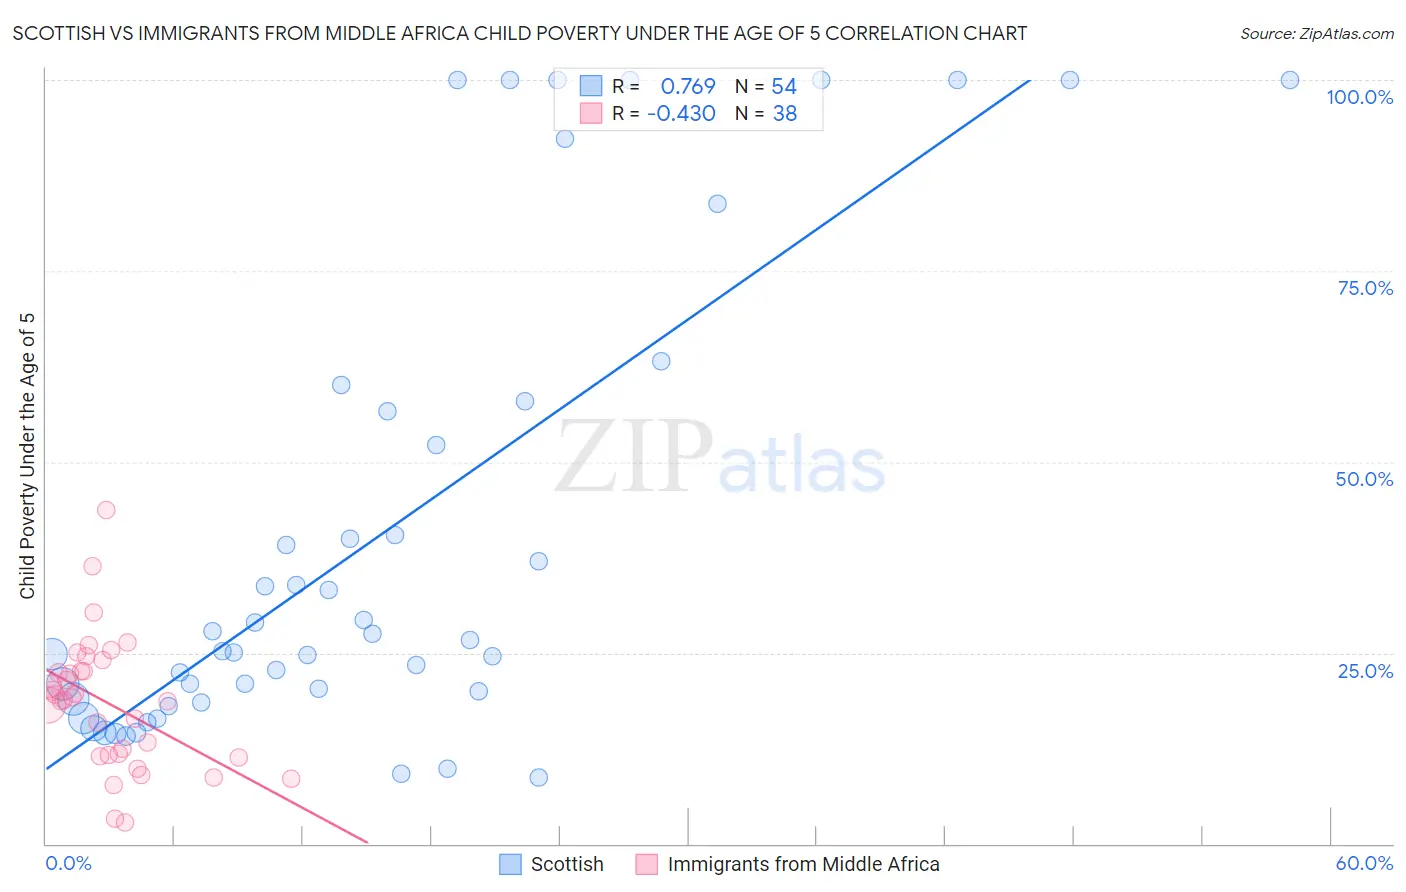 Scottish vs Immigrants from Middle Africa Child Poverty Under the Age of 5